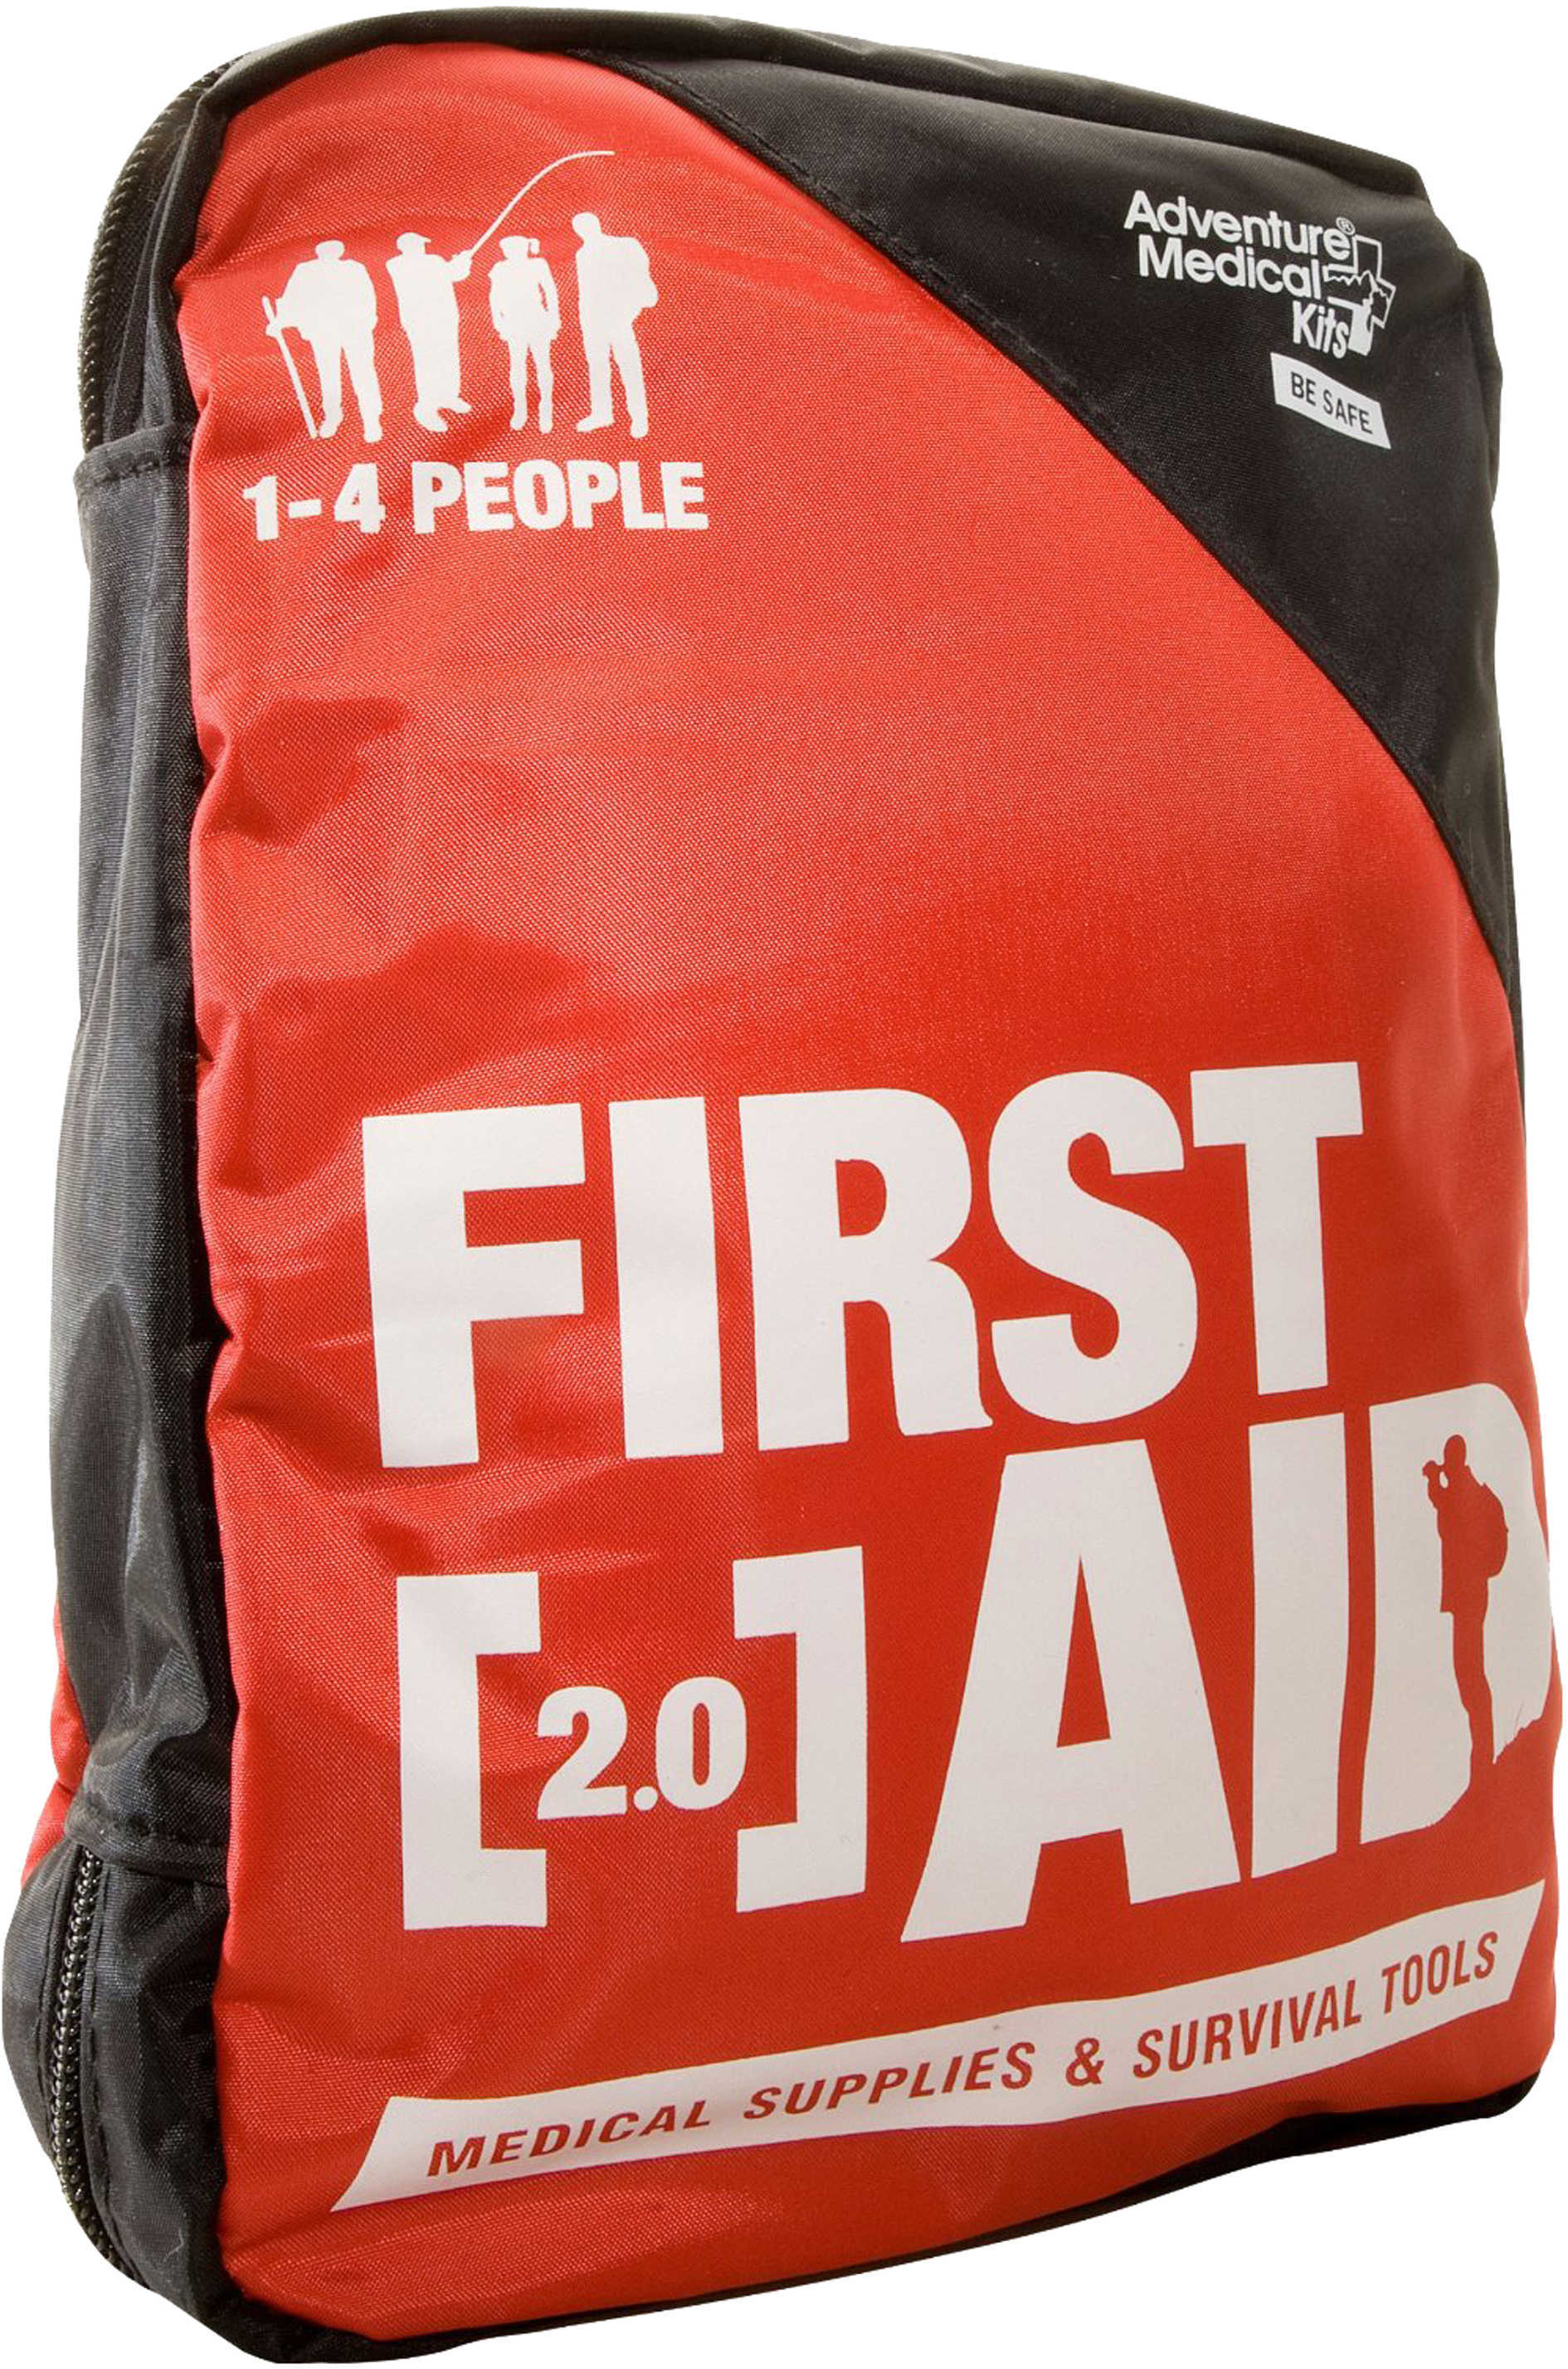 Adventure Medical Kits 01200220 2.0 First Aid